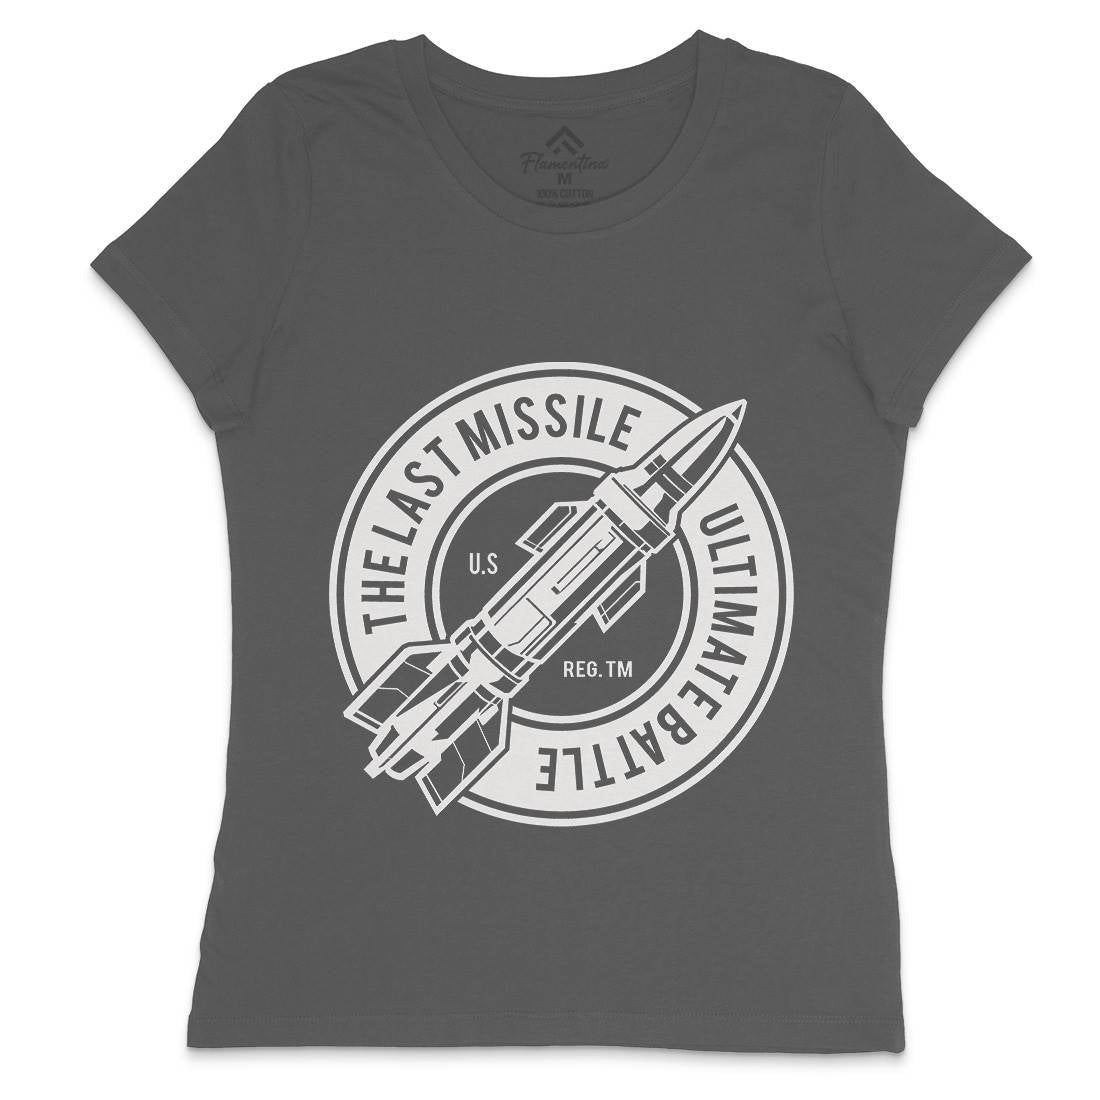 Last Missile Womens Crew Neck T-Shirt Army A175